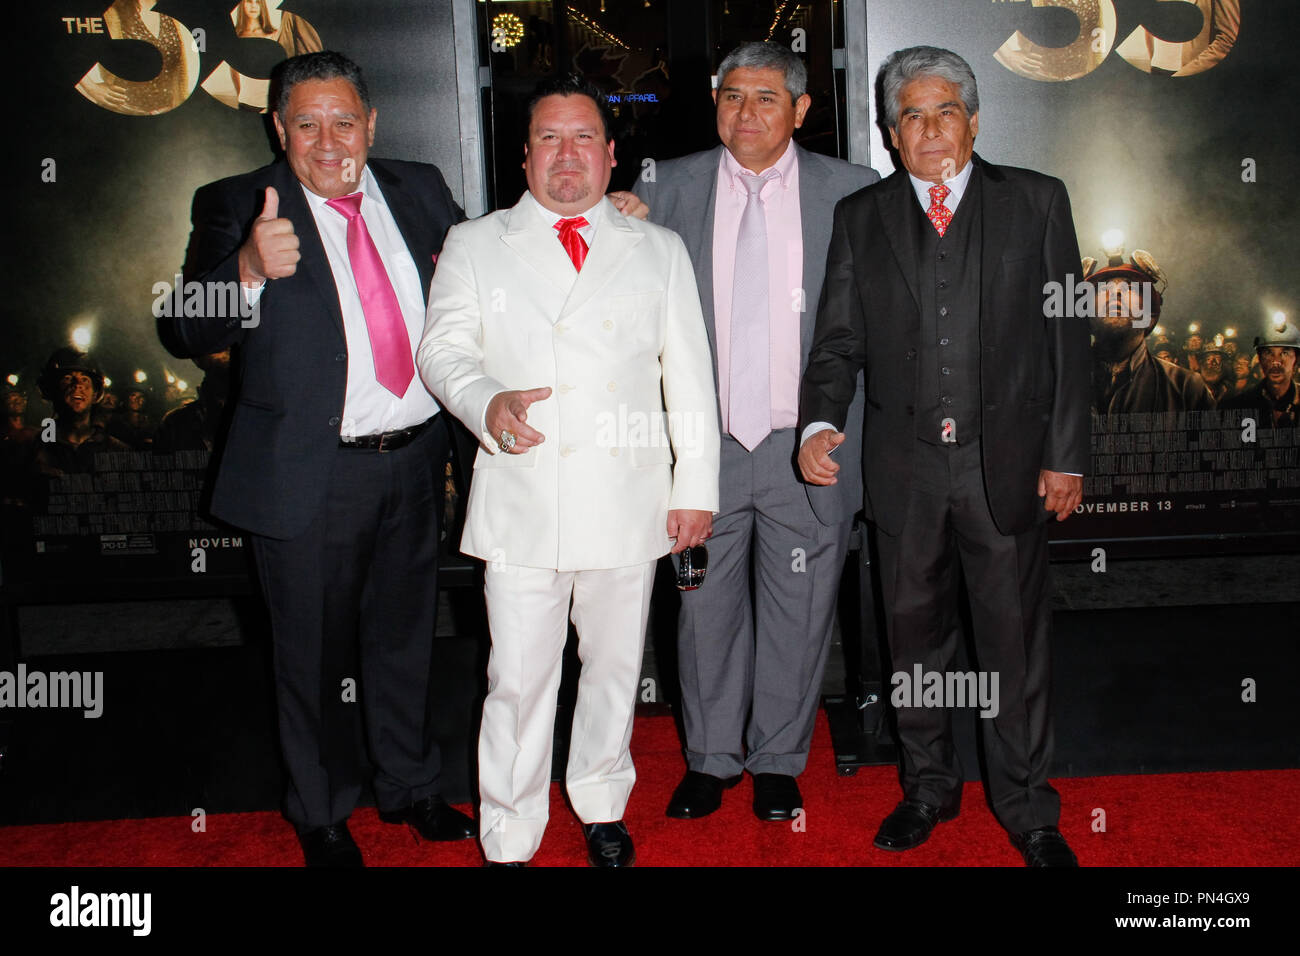 Luis Urzua, Edison 'Elvis' Pena, Juan Carlos Aguilar and Mario G at Warner Bros.' 'The 33'' Gala Screening at AFI Fest 2015  held at the TCL Chinese Theater in Hollywood, CA, November 9, 2015. Photo by Joe Martinez / PictureLux Stock Photo